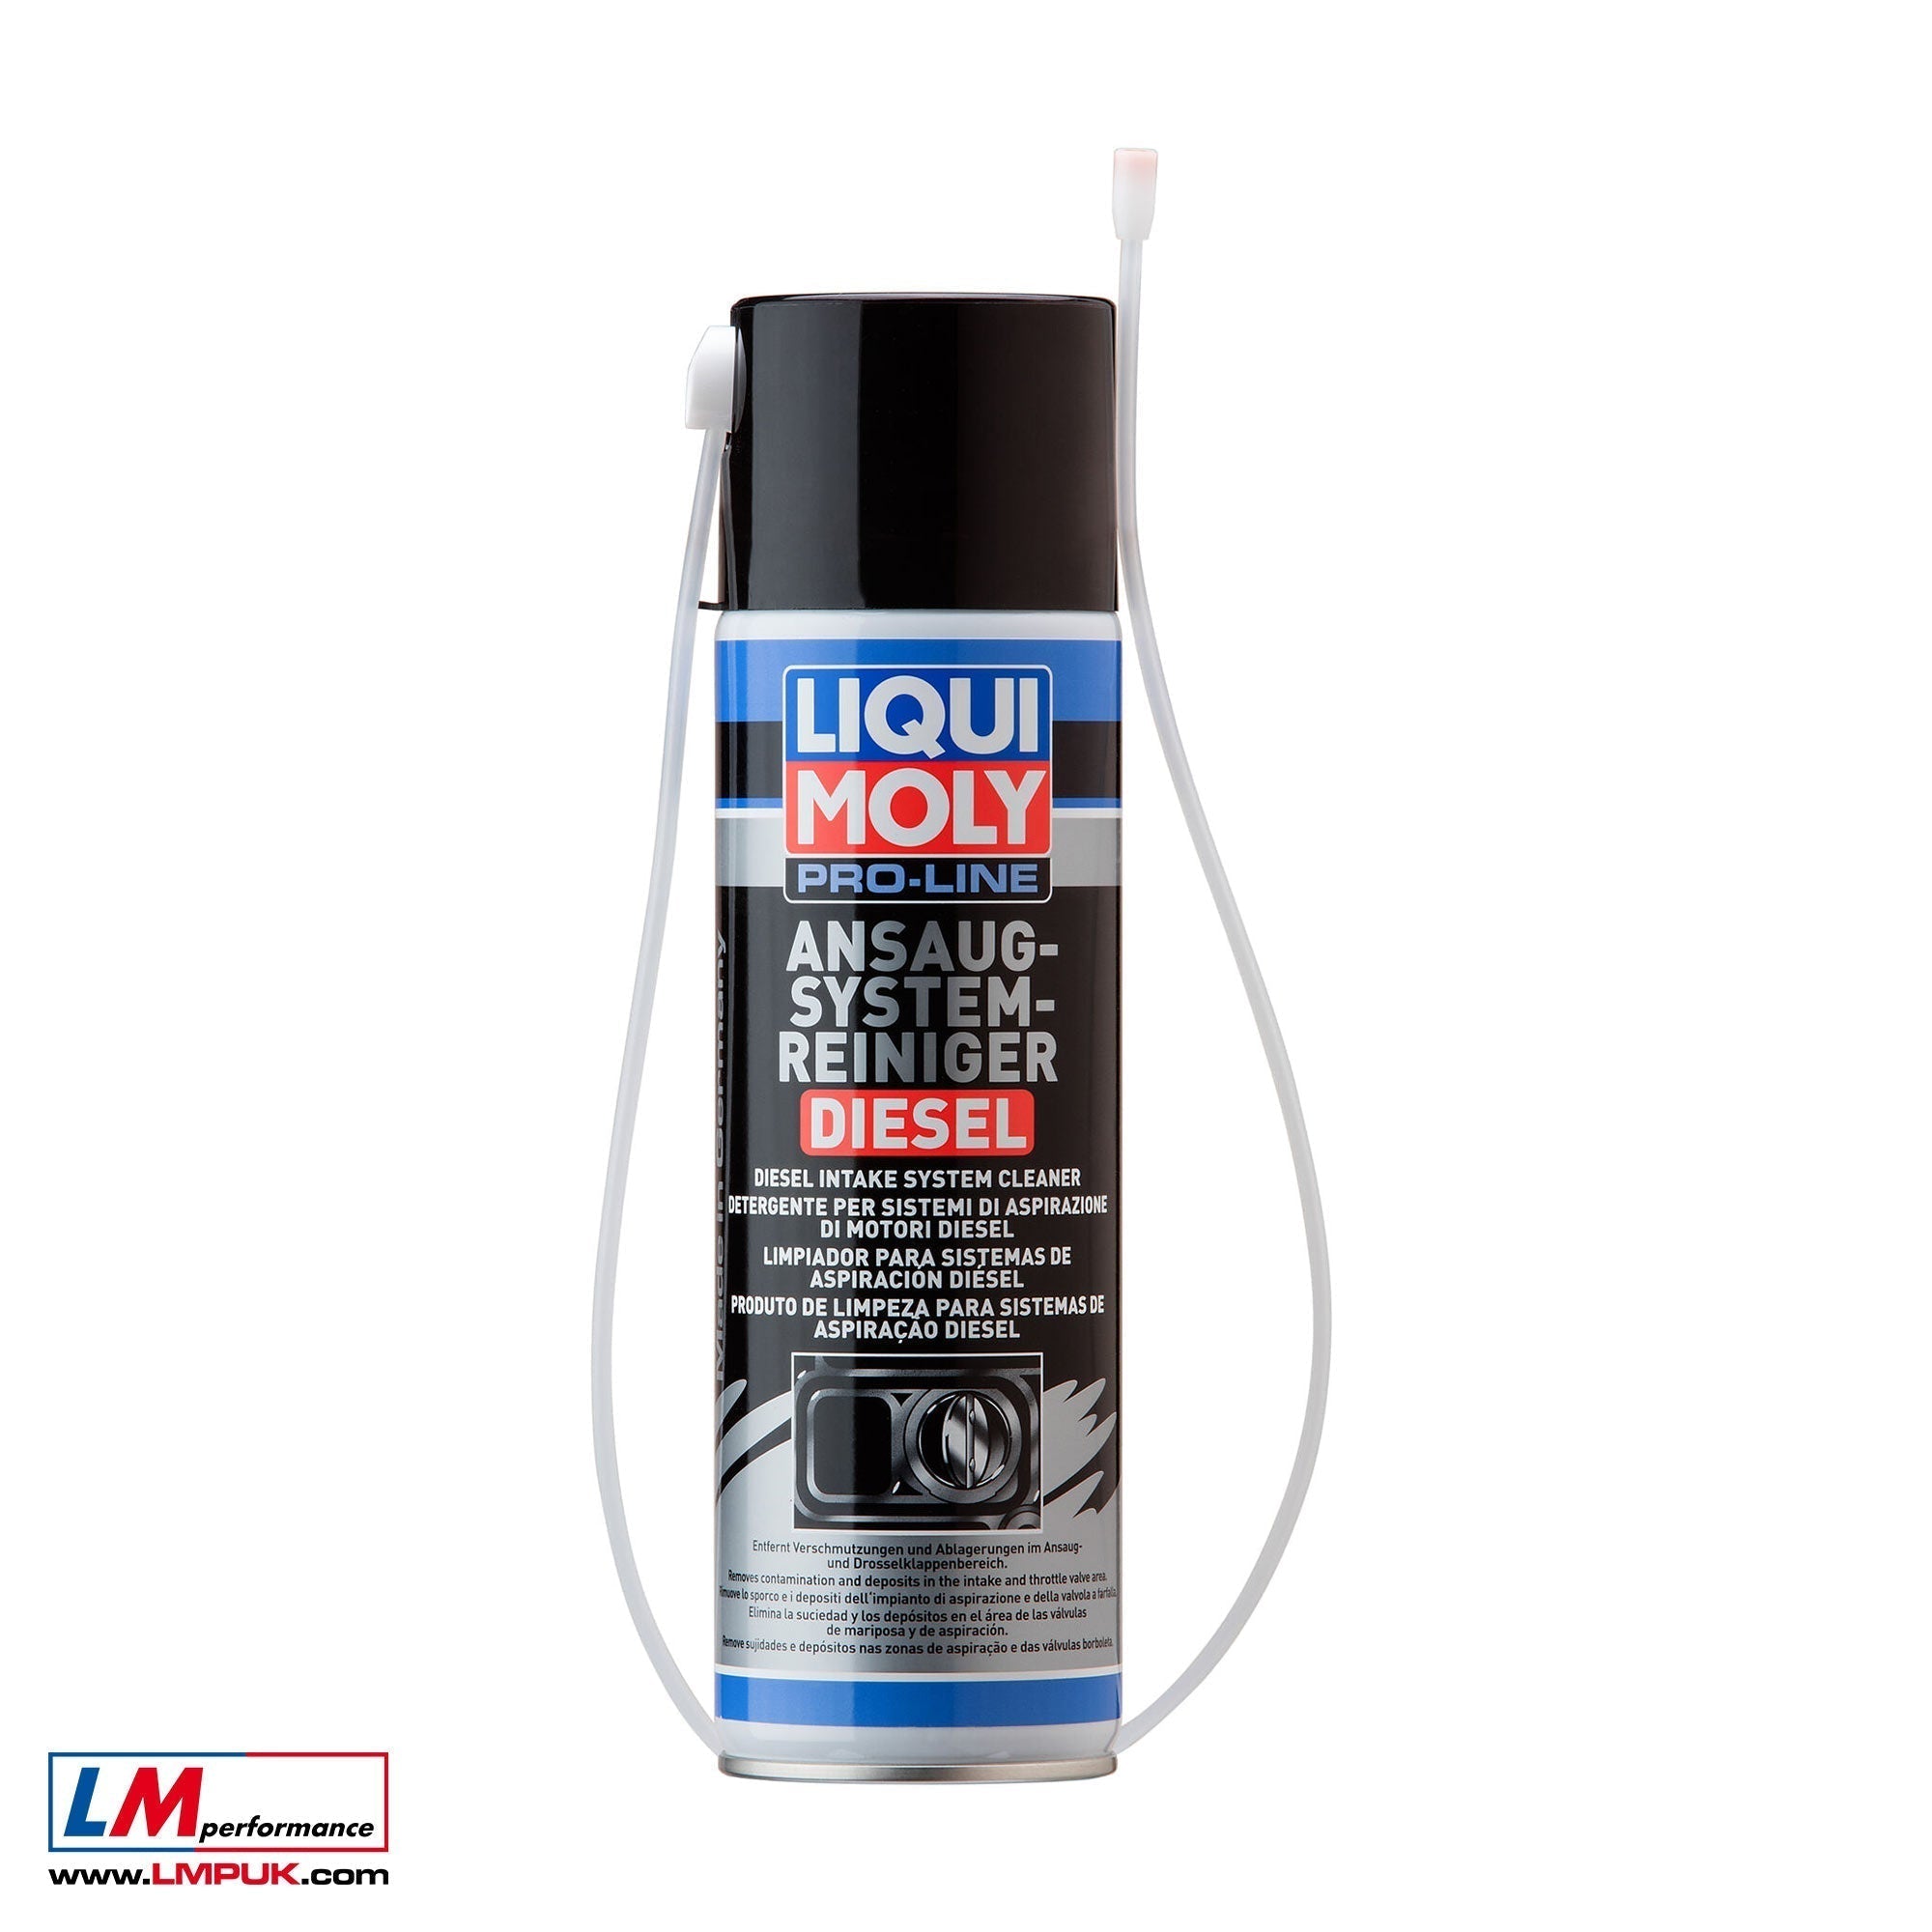 Liqui Moly Top Tec 4200 (8972)  Leader in lubricants and additives